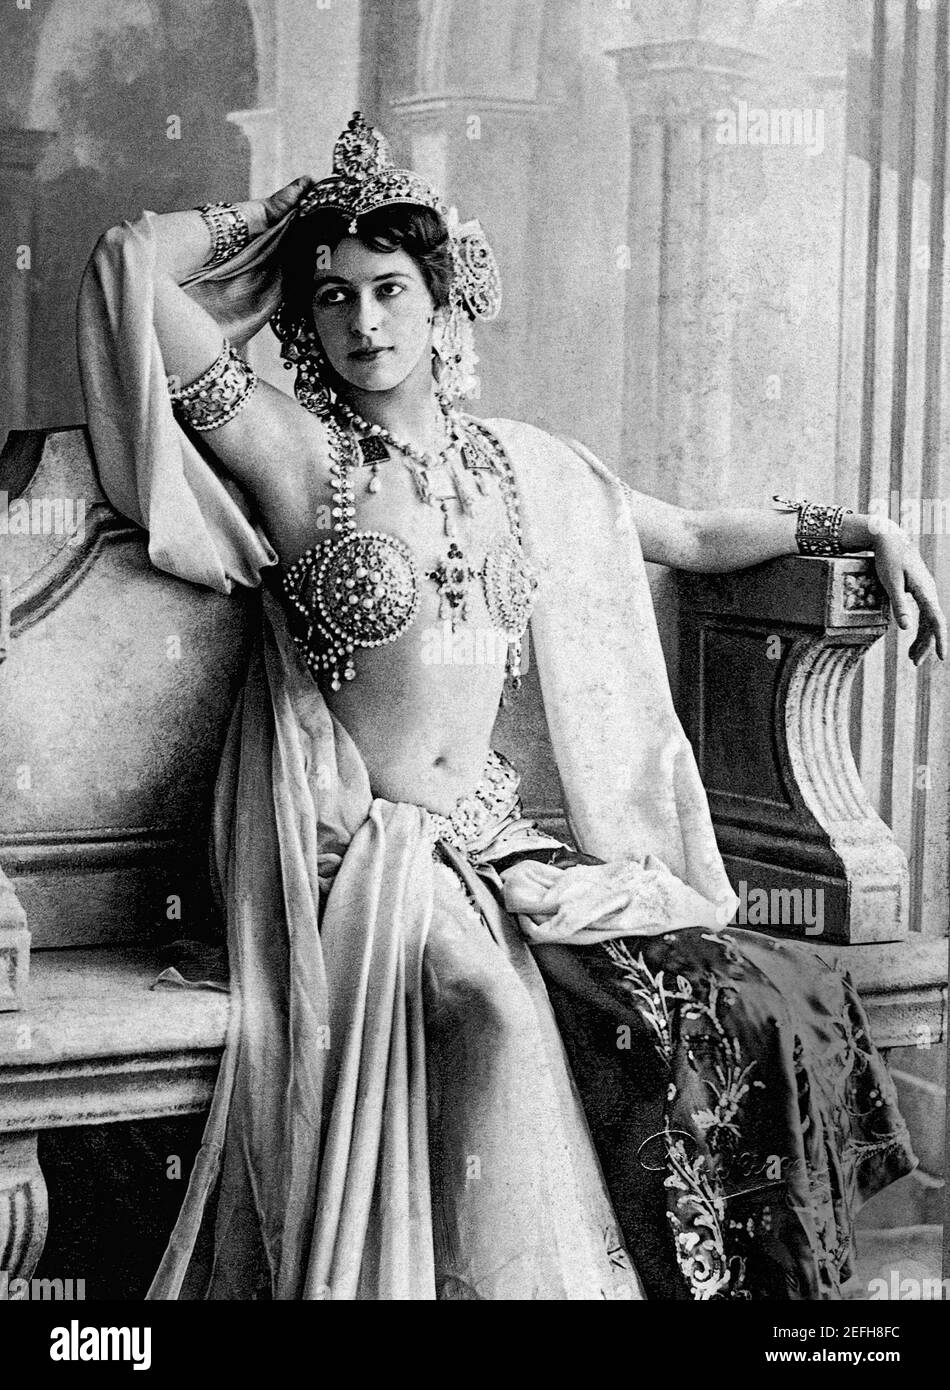 Mata Hari in 1906, soon after the Dutchwoman reinvented herself as an exotic dancer. Inspired by dances she had seen in the Dutch East Indies, she took a stage name that means 'eye of the day' in Malay.  / File Reference # 1003-843THA Stock Photo